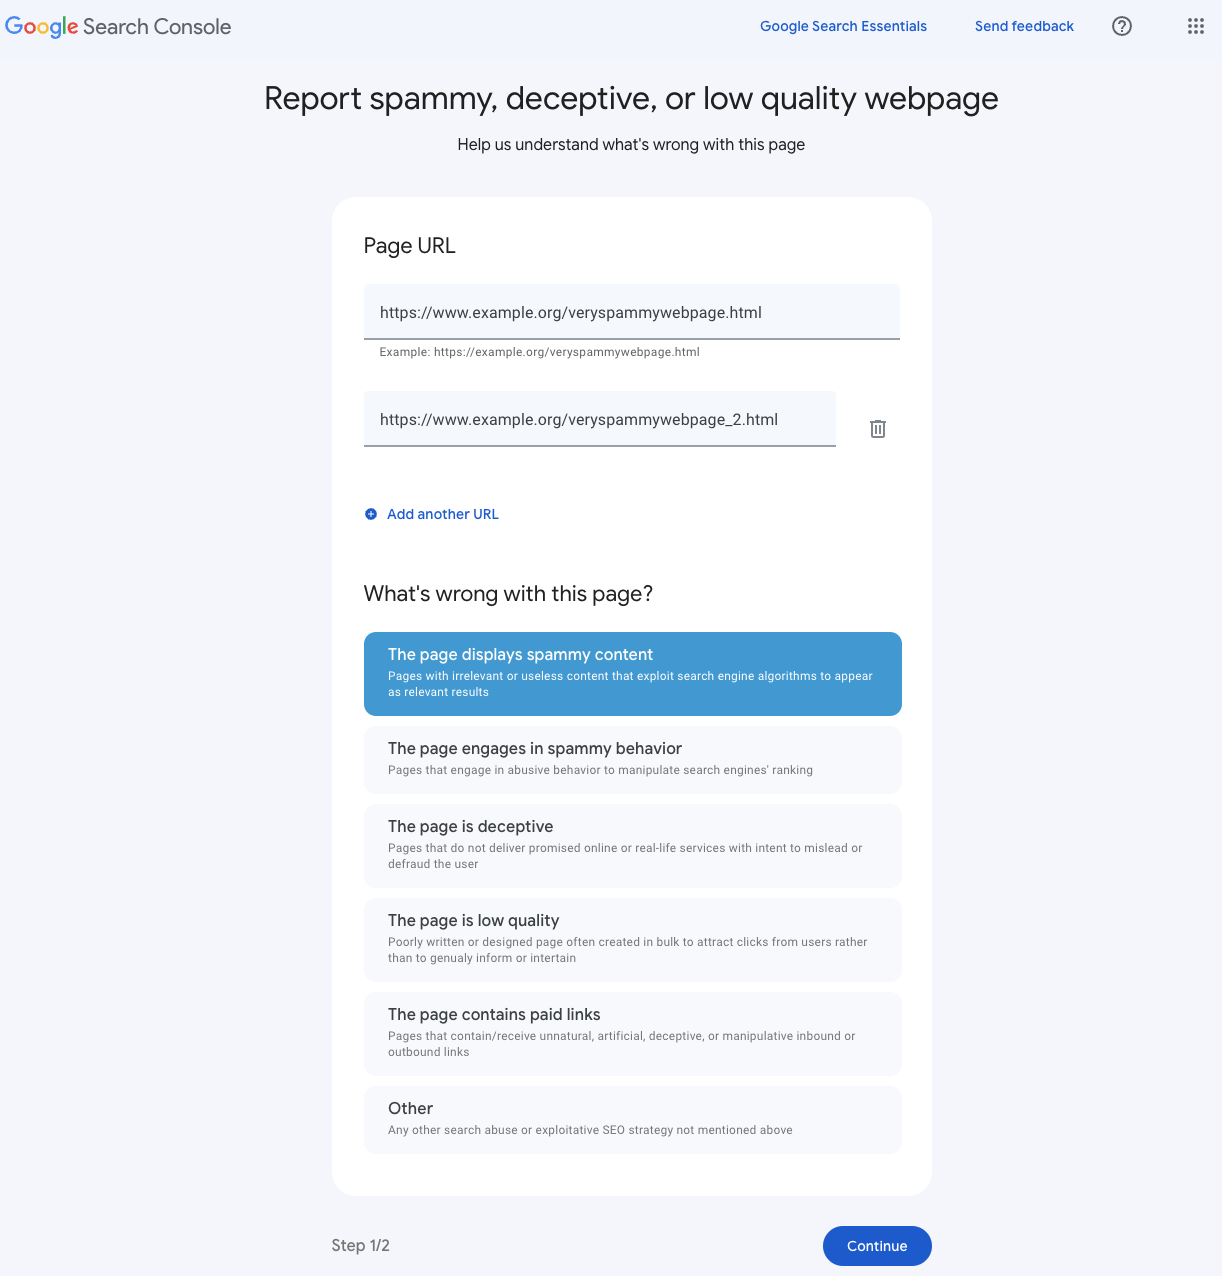 Google wants to improve search quality with a new feedback form